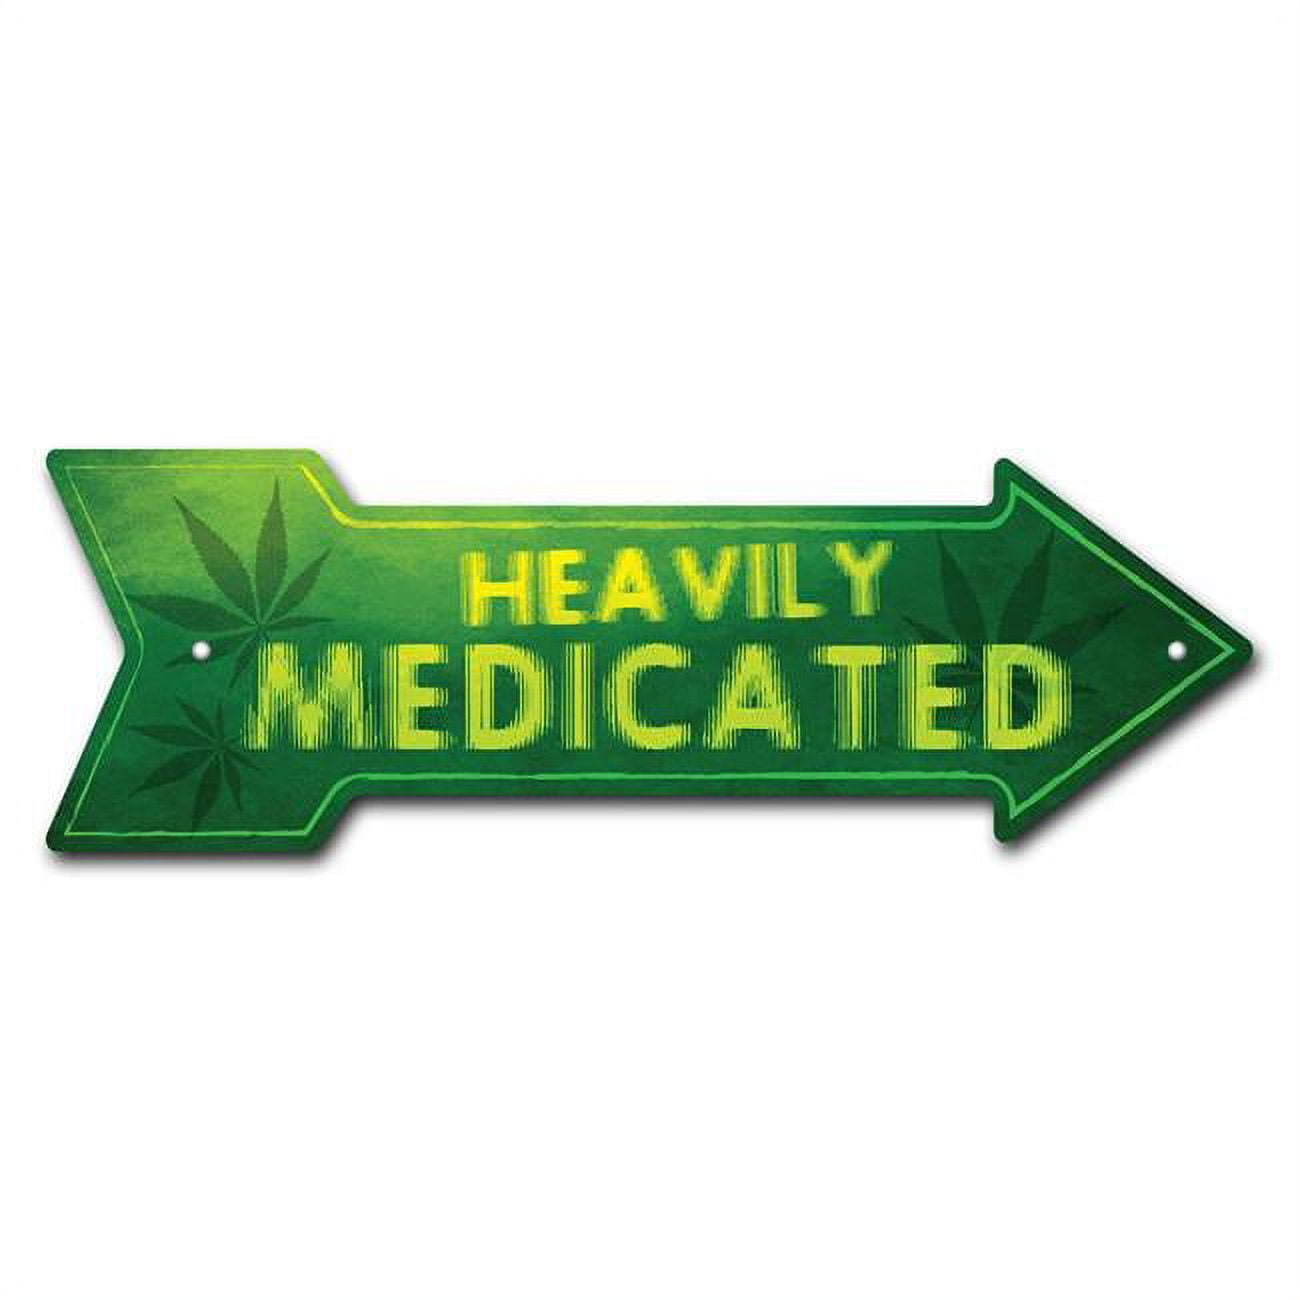 SignMission P-ARROW8-999825 8 x 24 in. Wide Heavily Medicated Arrow Sign 